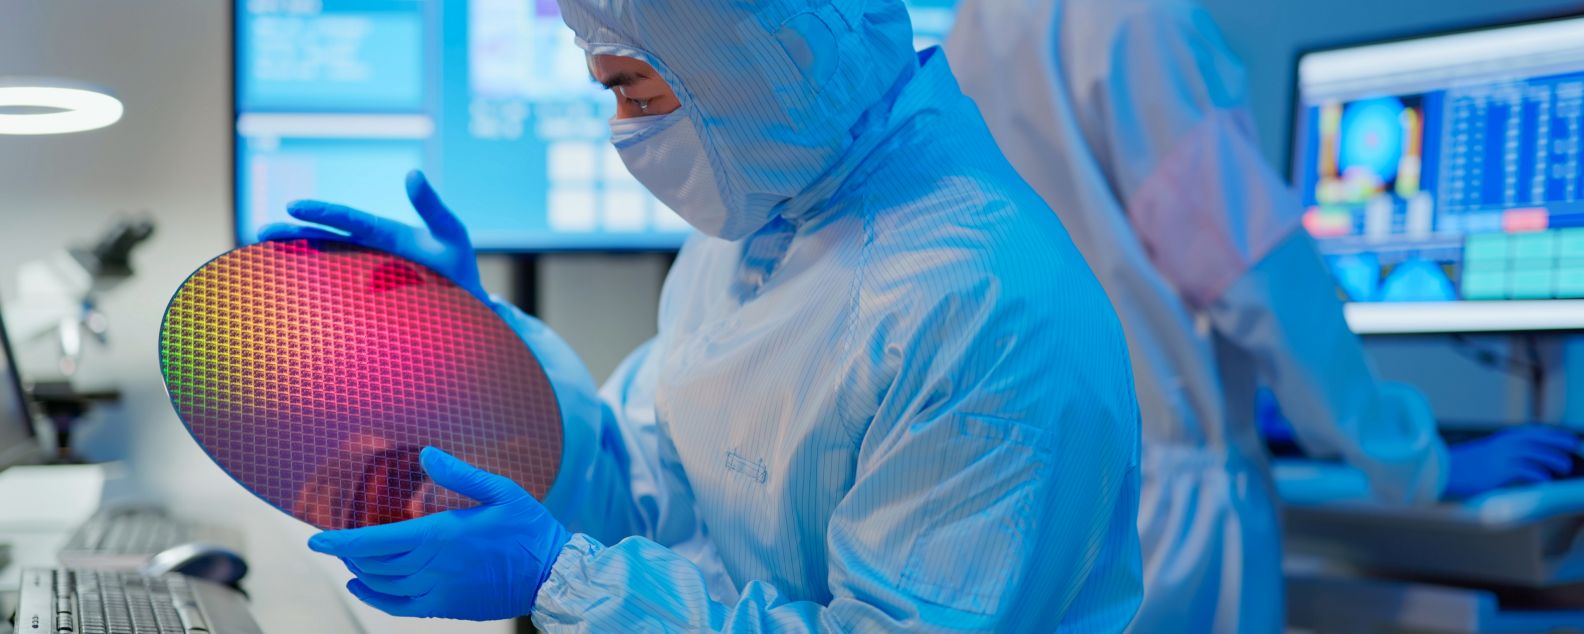 A technician in a clean suit holds a silicon wafer in a lab